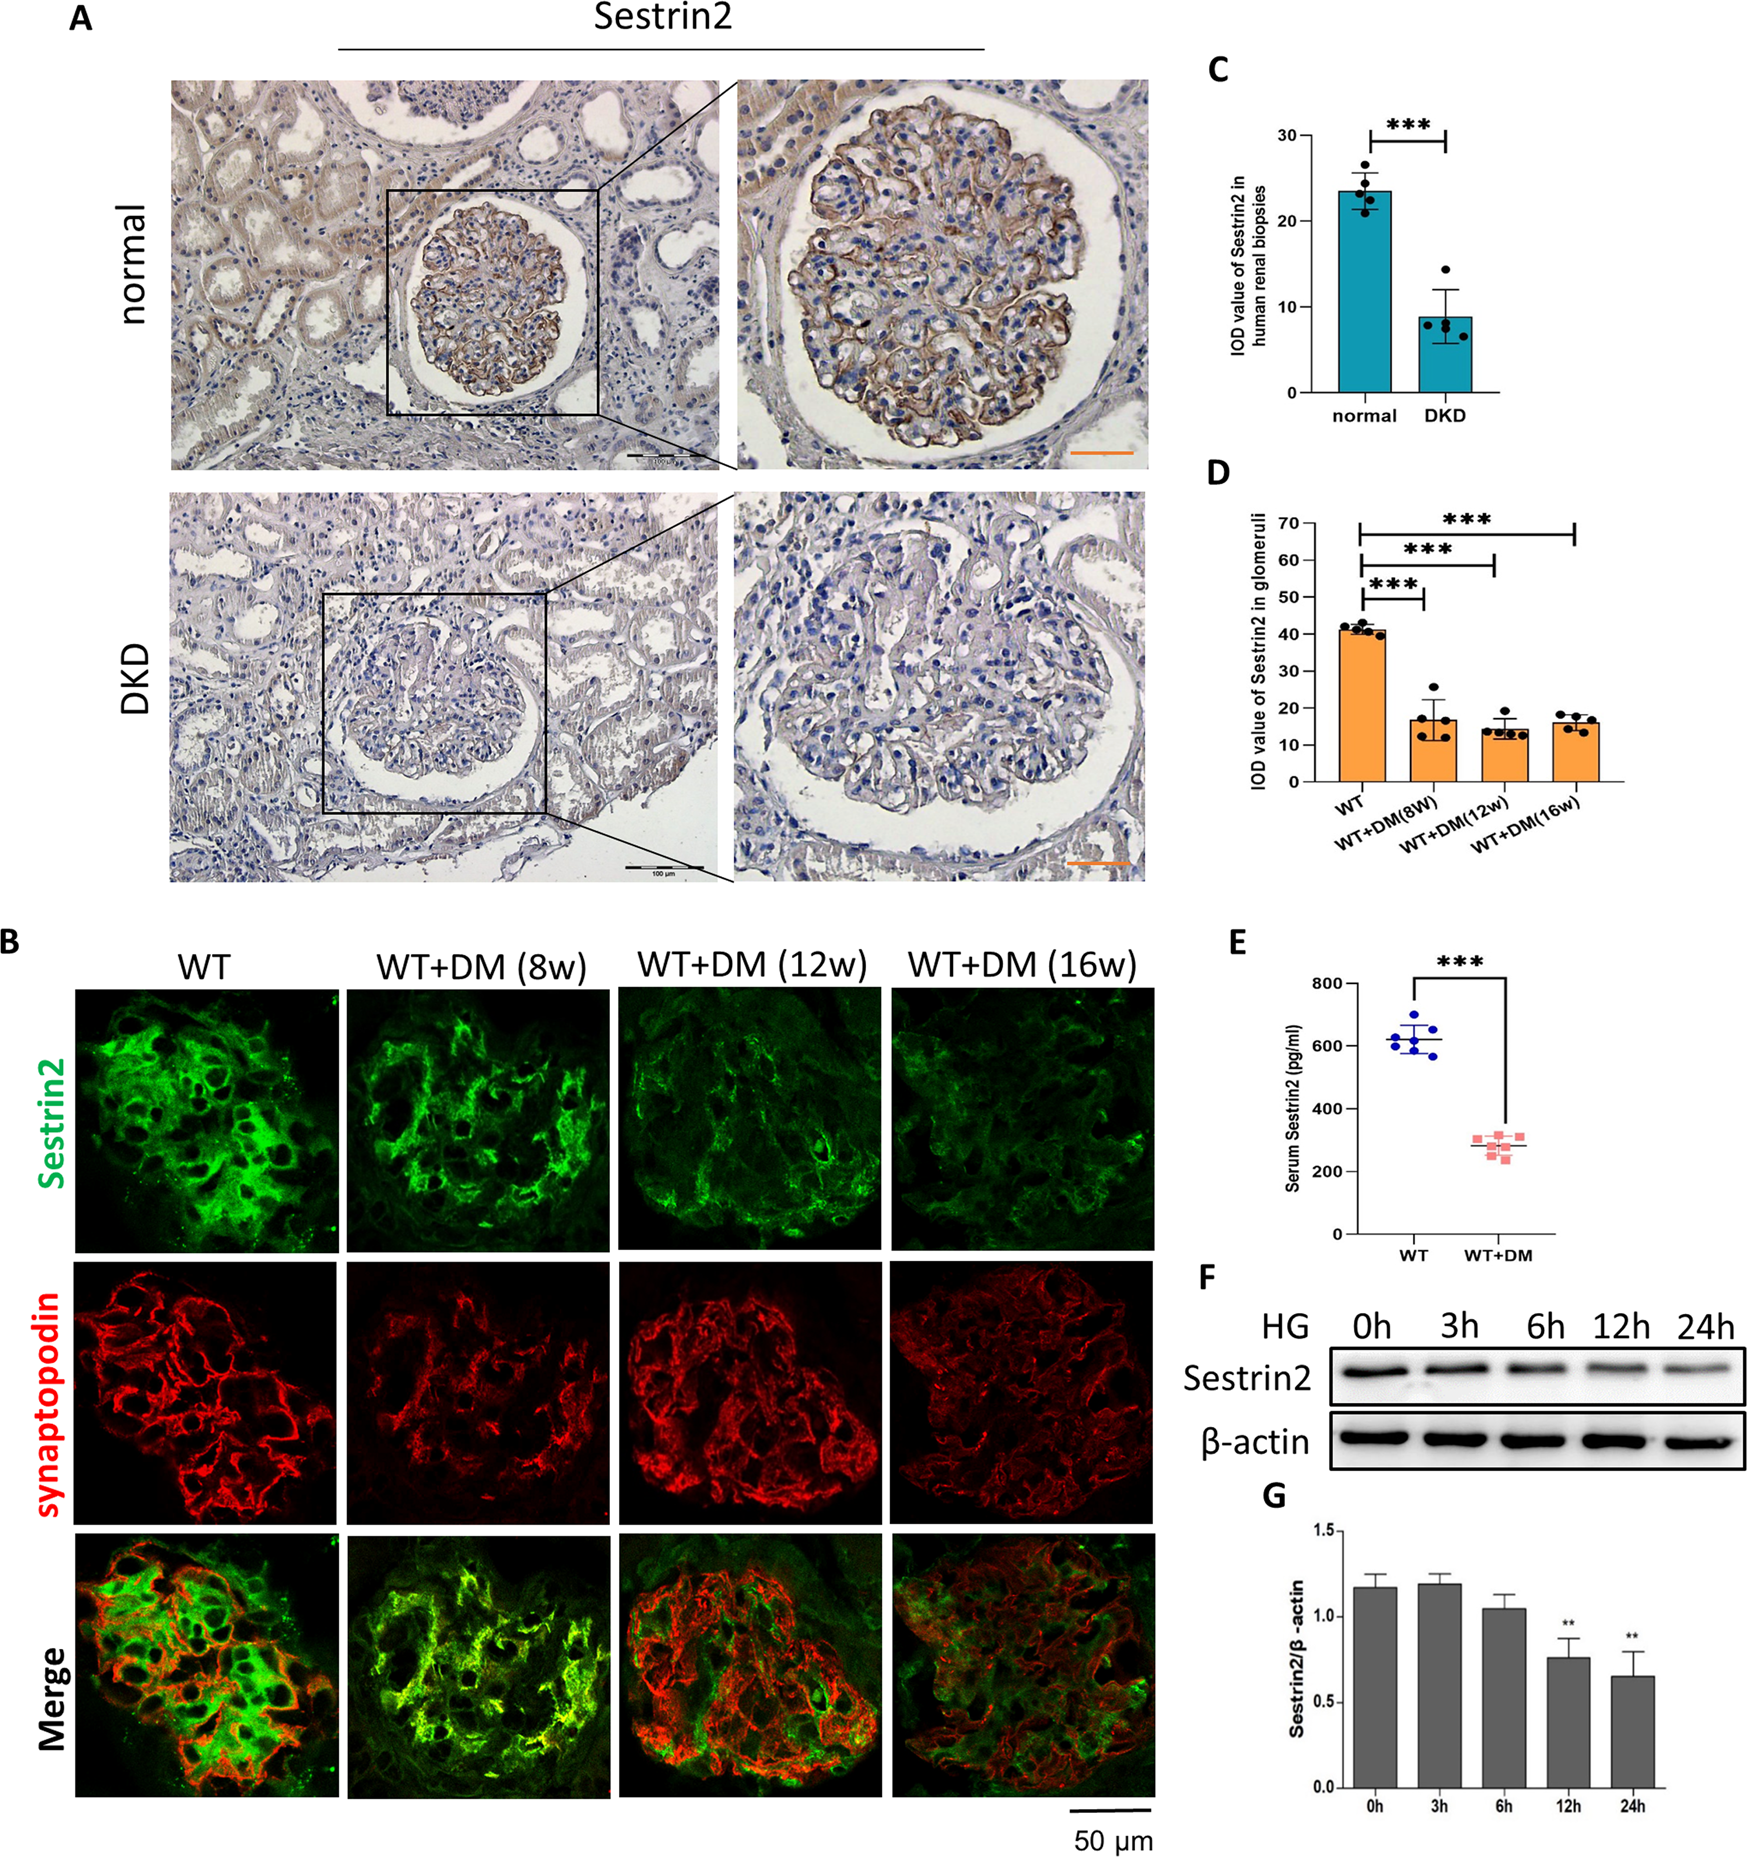 Sestrin2 remedies podocyte injury via orchestrating TSP-1/TGF-β1/Smad3 axis  in diabetic kidney disease | Cell Death & Disease